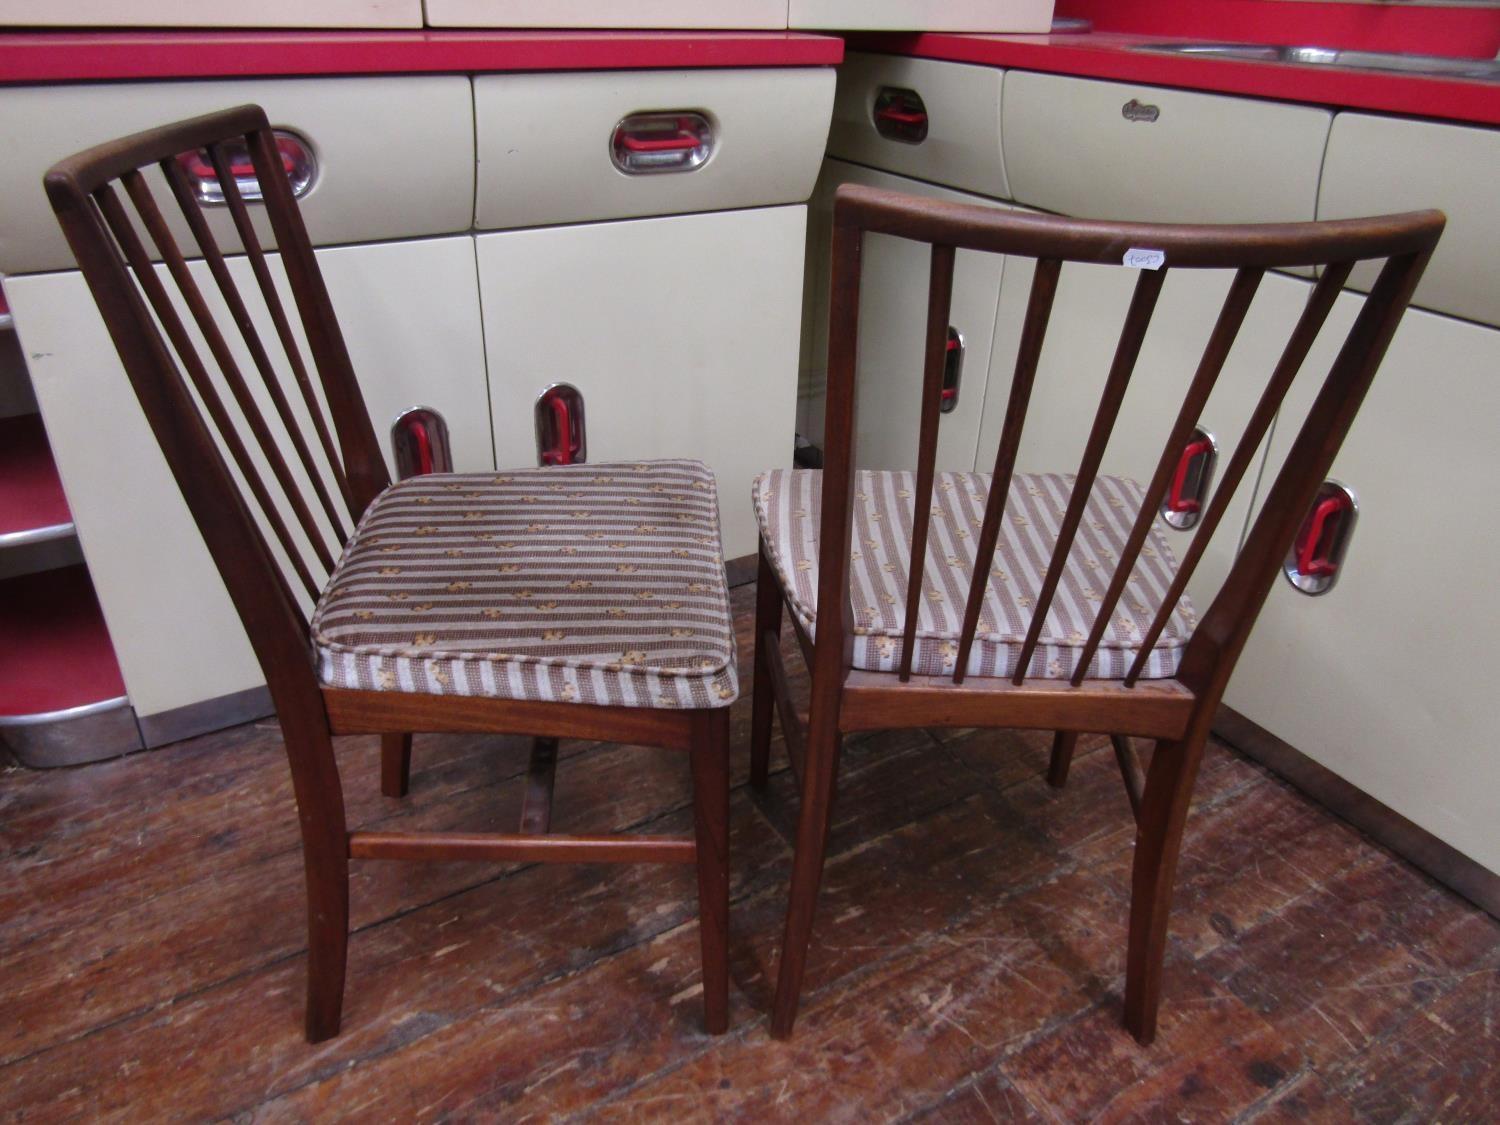 Set of four Danish type teak fan stick back chairs with stuff-over seats - Image 2 of 2